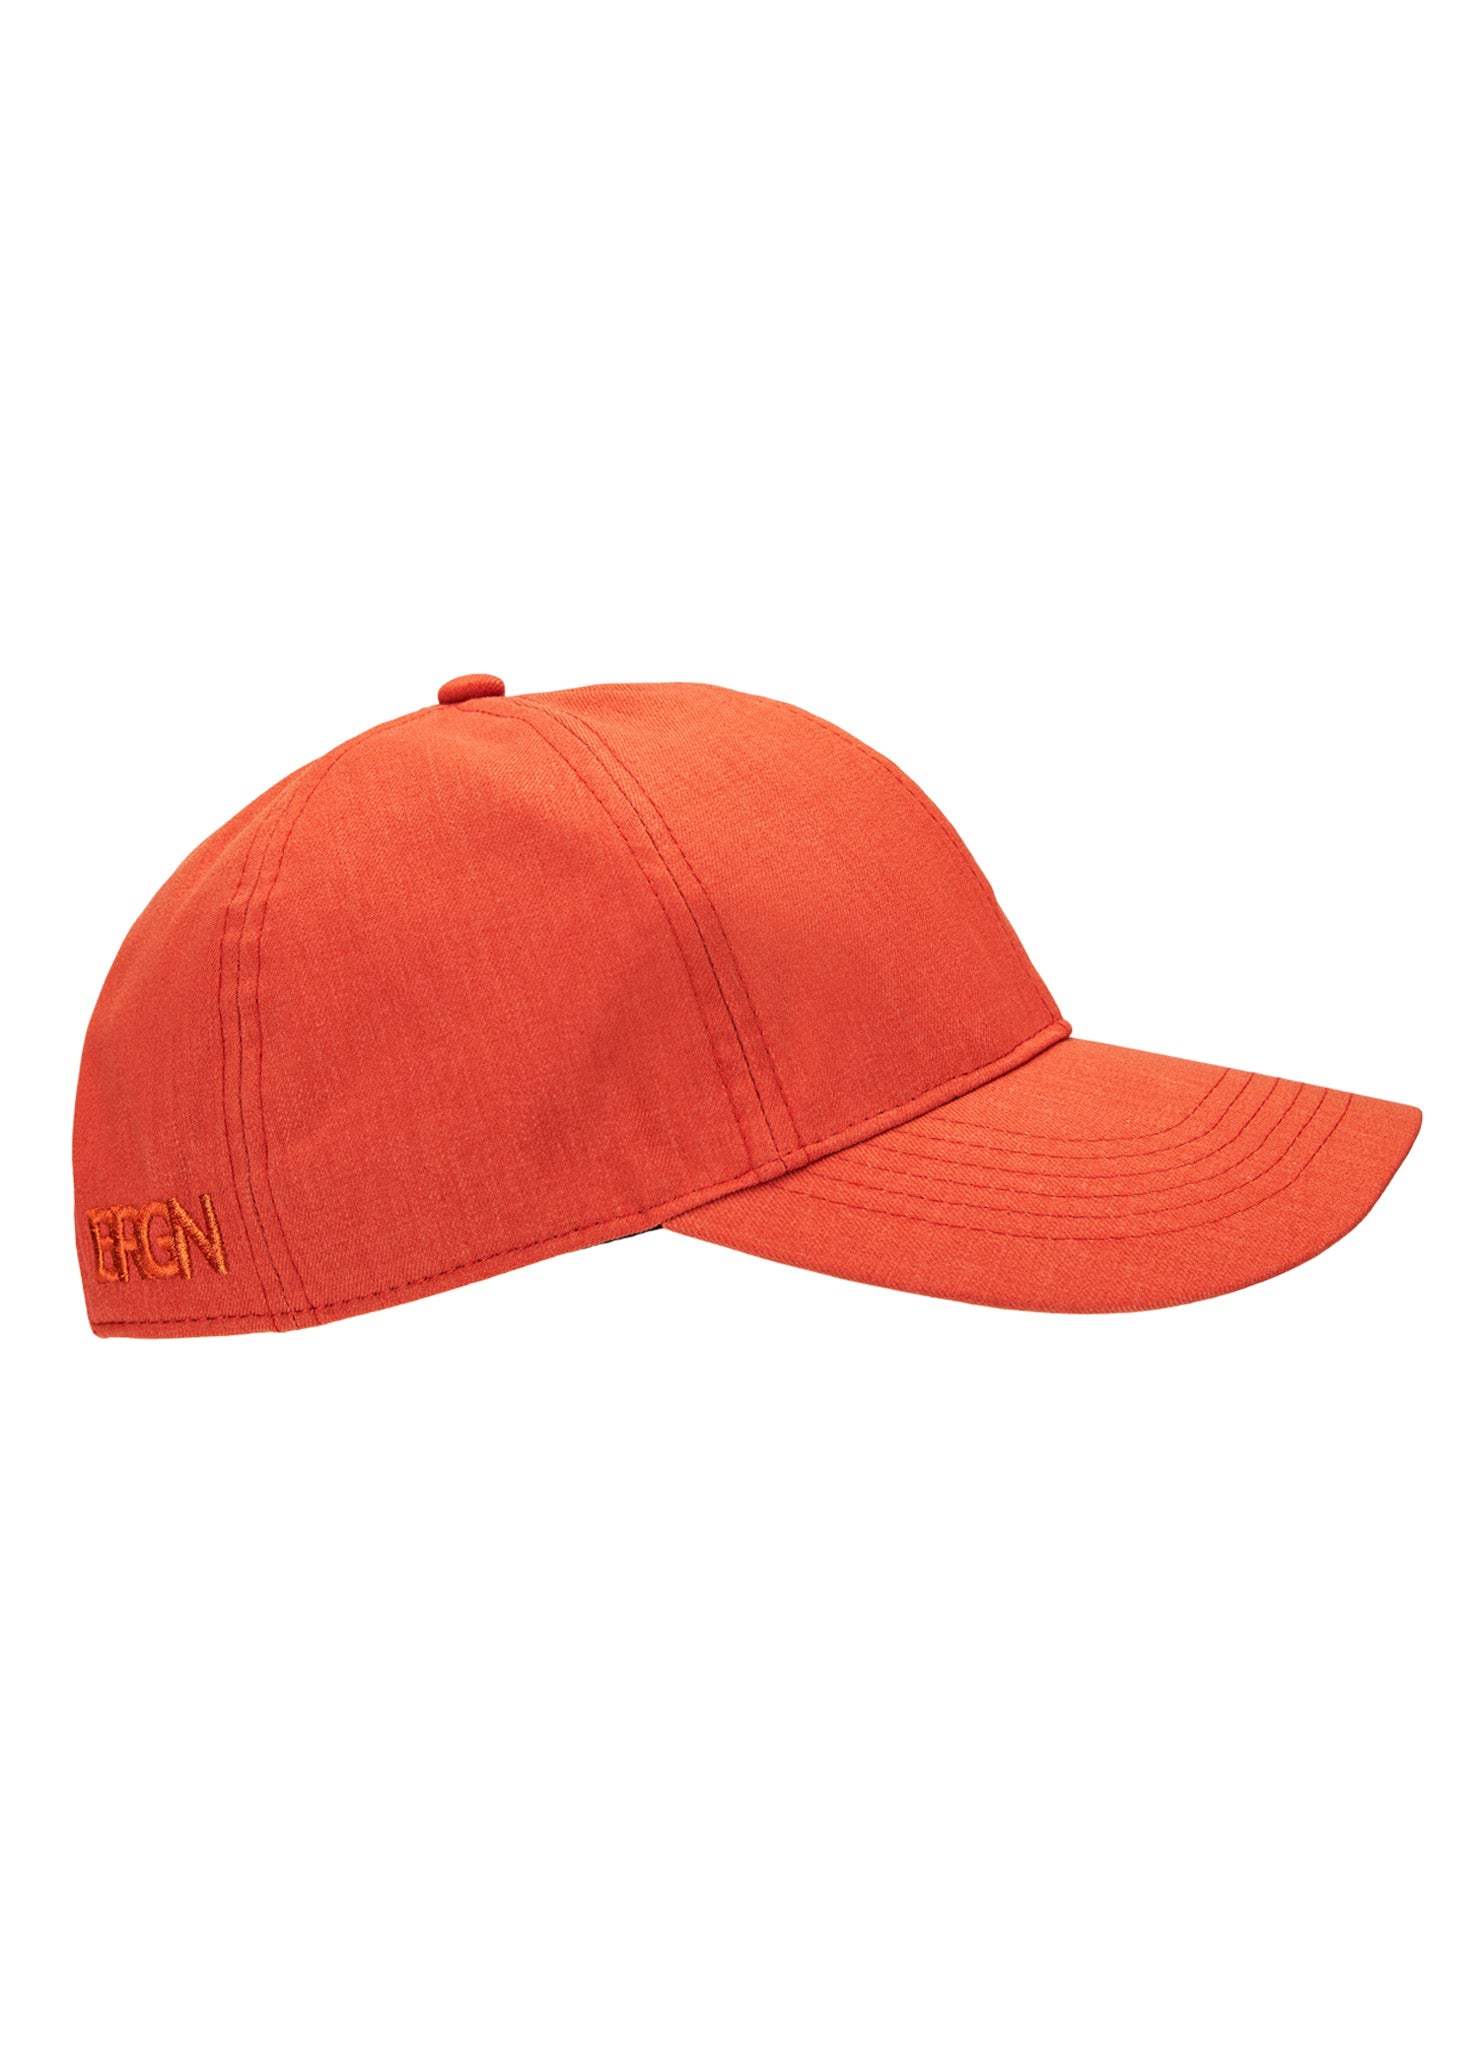 BRGN by Lunde & Gaundal Padded Caps Limited edition Accessories 275 Sunset Orange